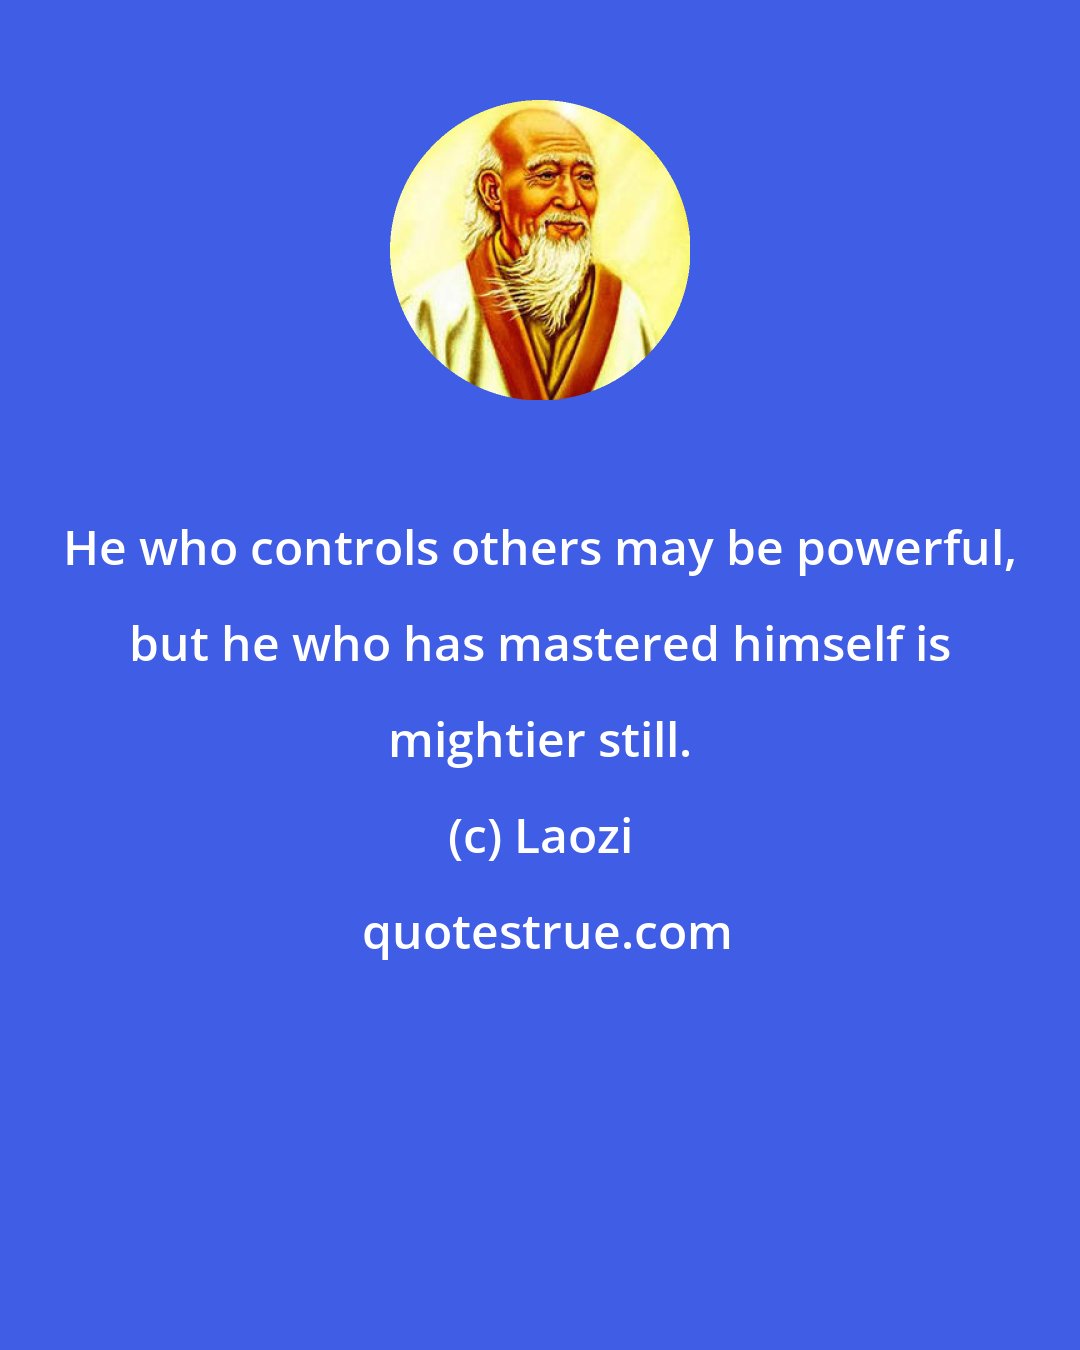 Laozi: He who controls others may be powerful, but he who has mastered himself is mightier still.